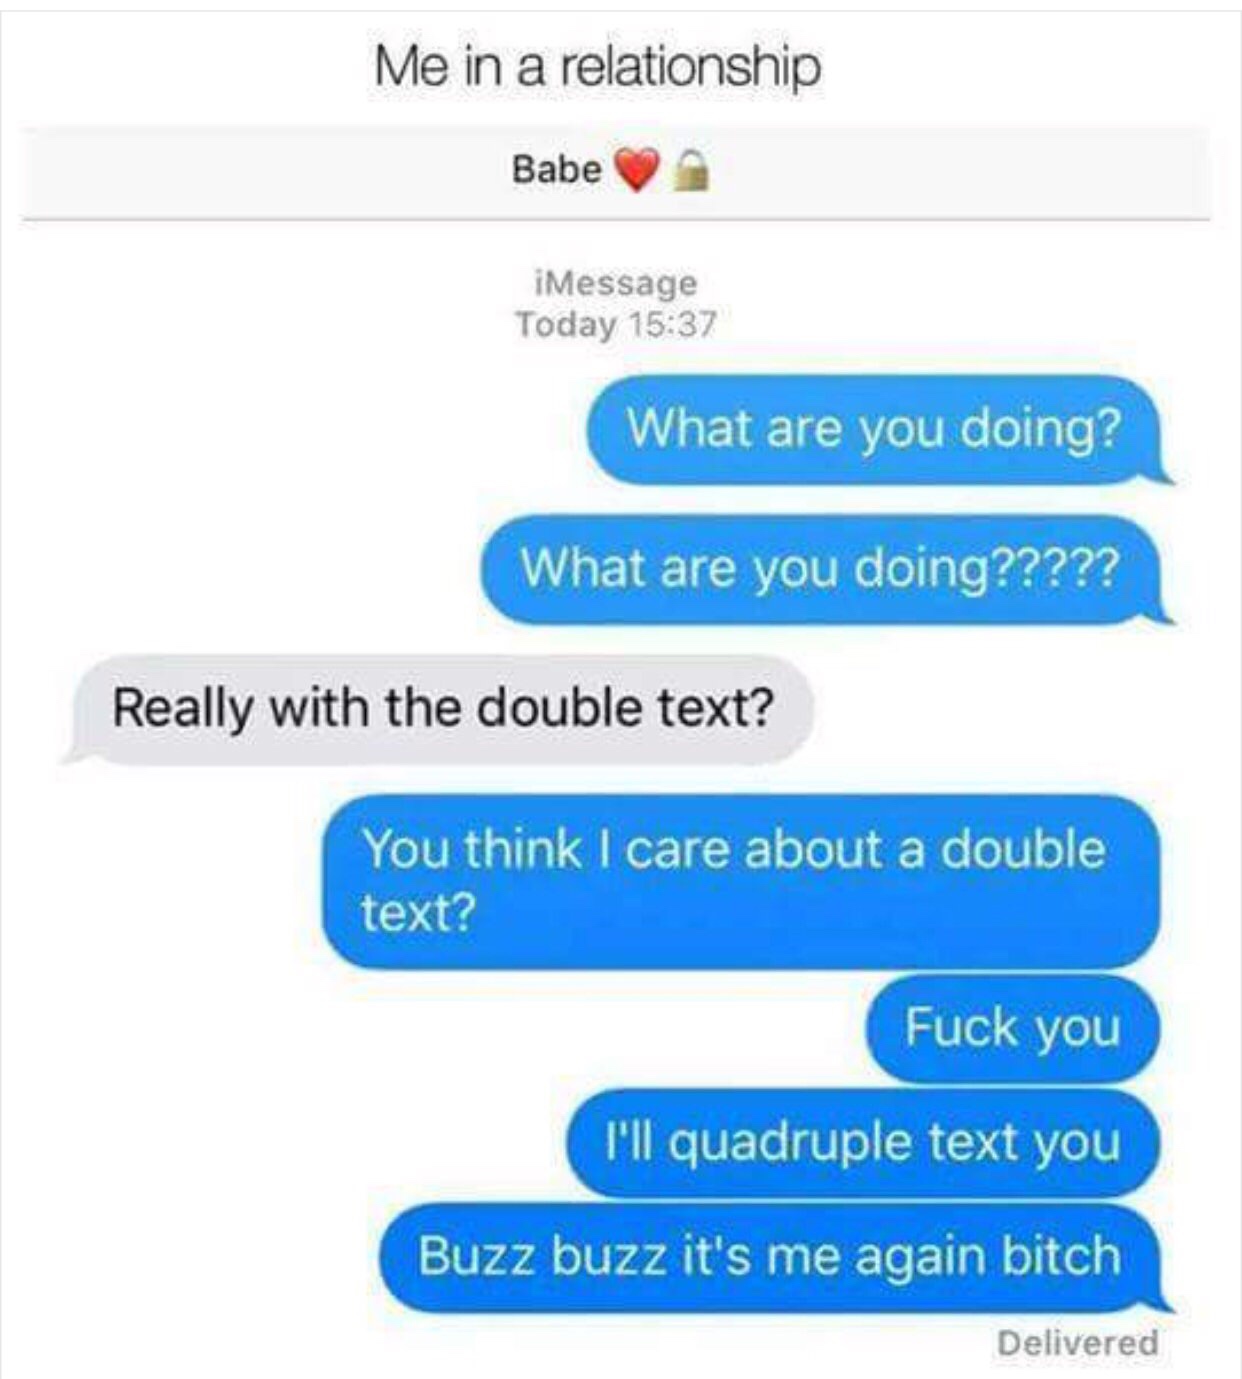 random pics - buzz buzz it's me again meme - Me in a relationship Babe iMessage Today What are you doing? What are you doing????? Really with the double text? You think I care about a double text? Fuck you I'll quadruple text you Buzz buzz it's me again b